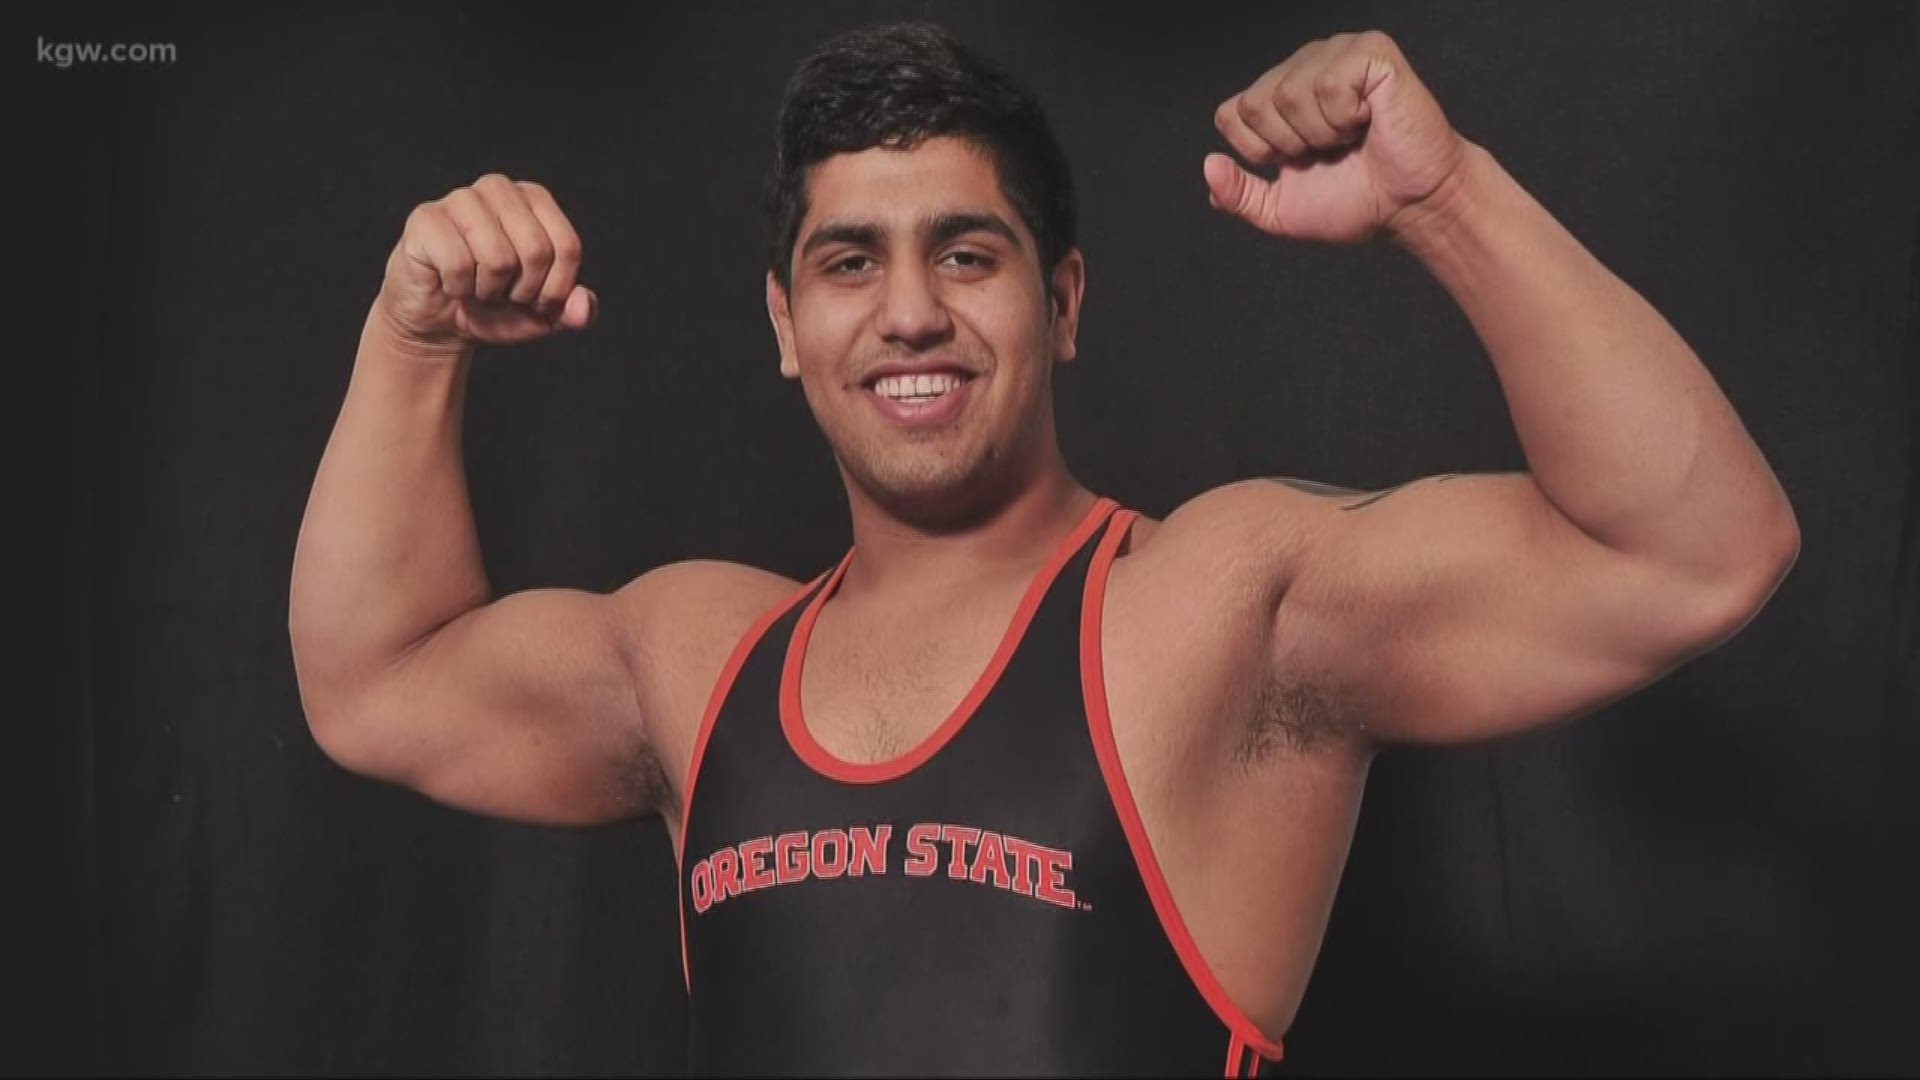 Amar Dhesi is an All-American, PAC-12 champion and now an Olympian, clinching a spot with Team Canada.